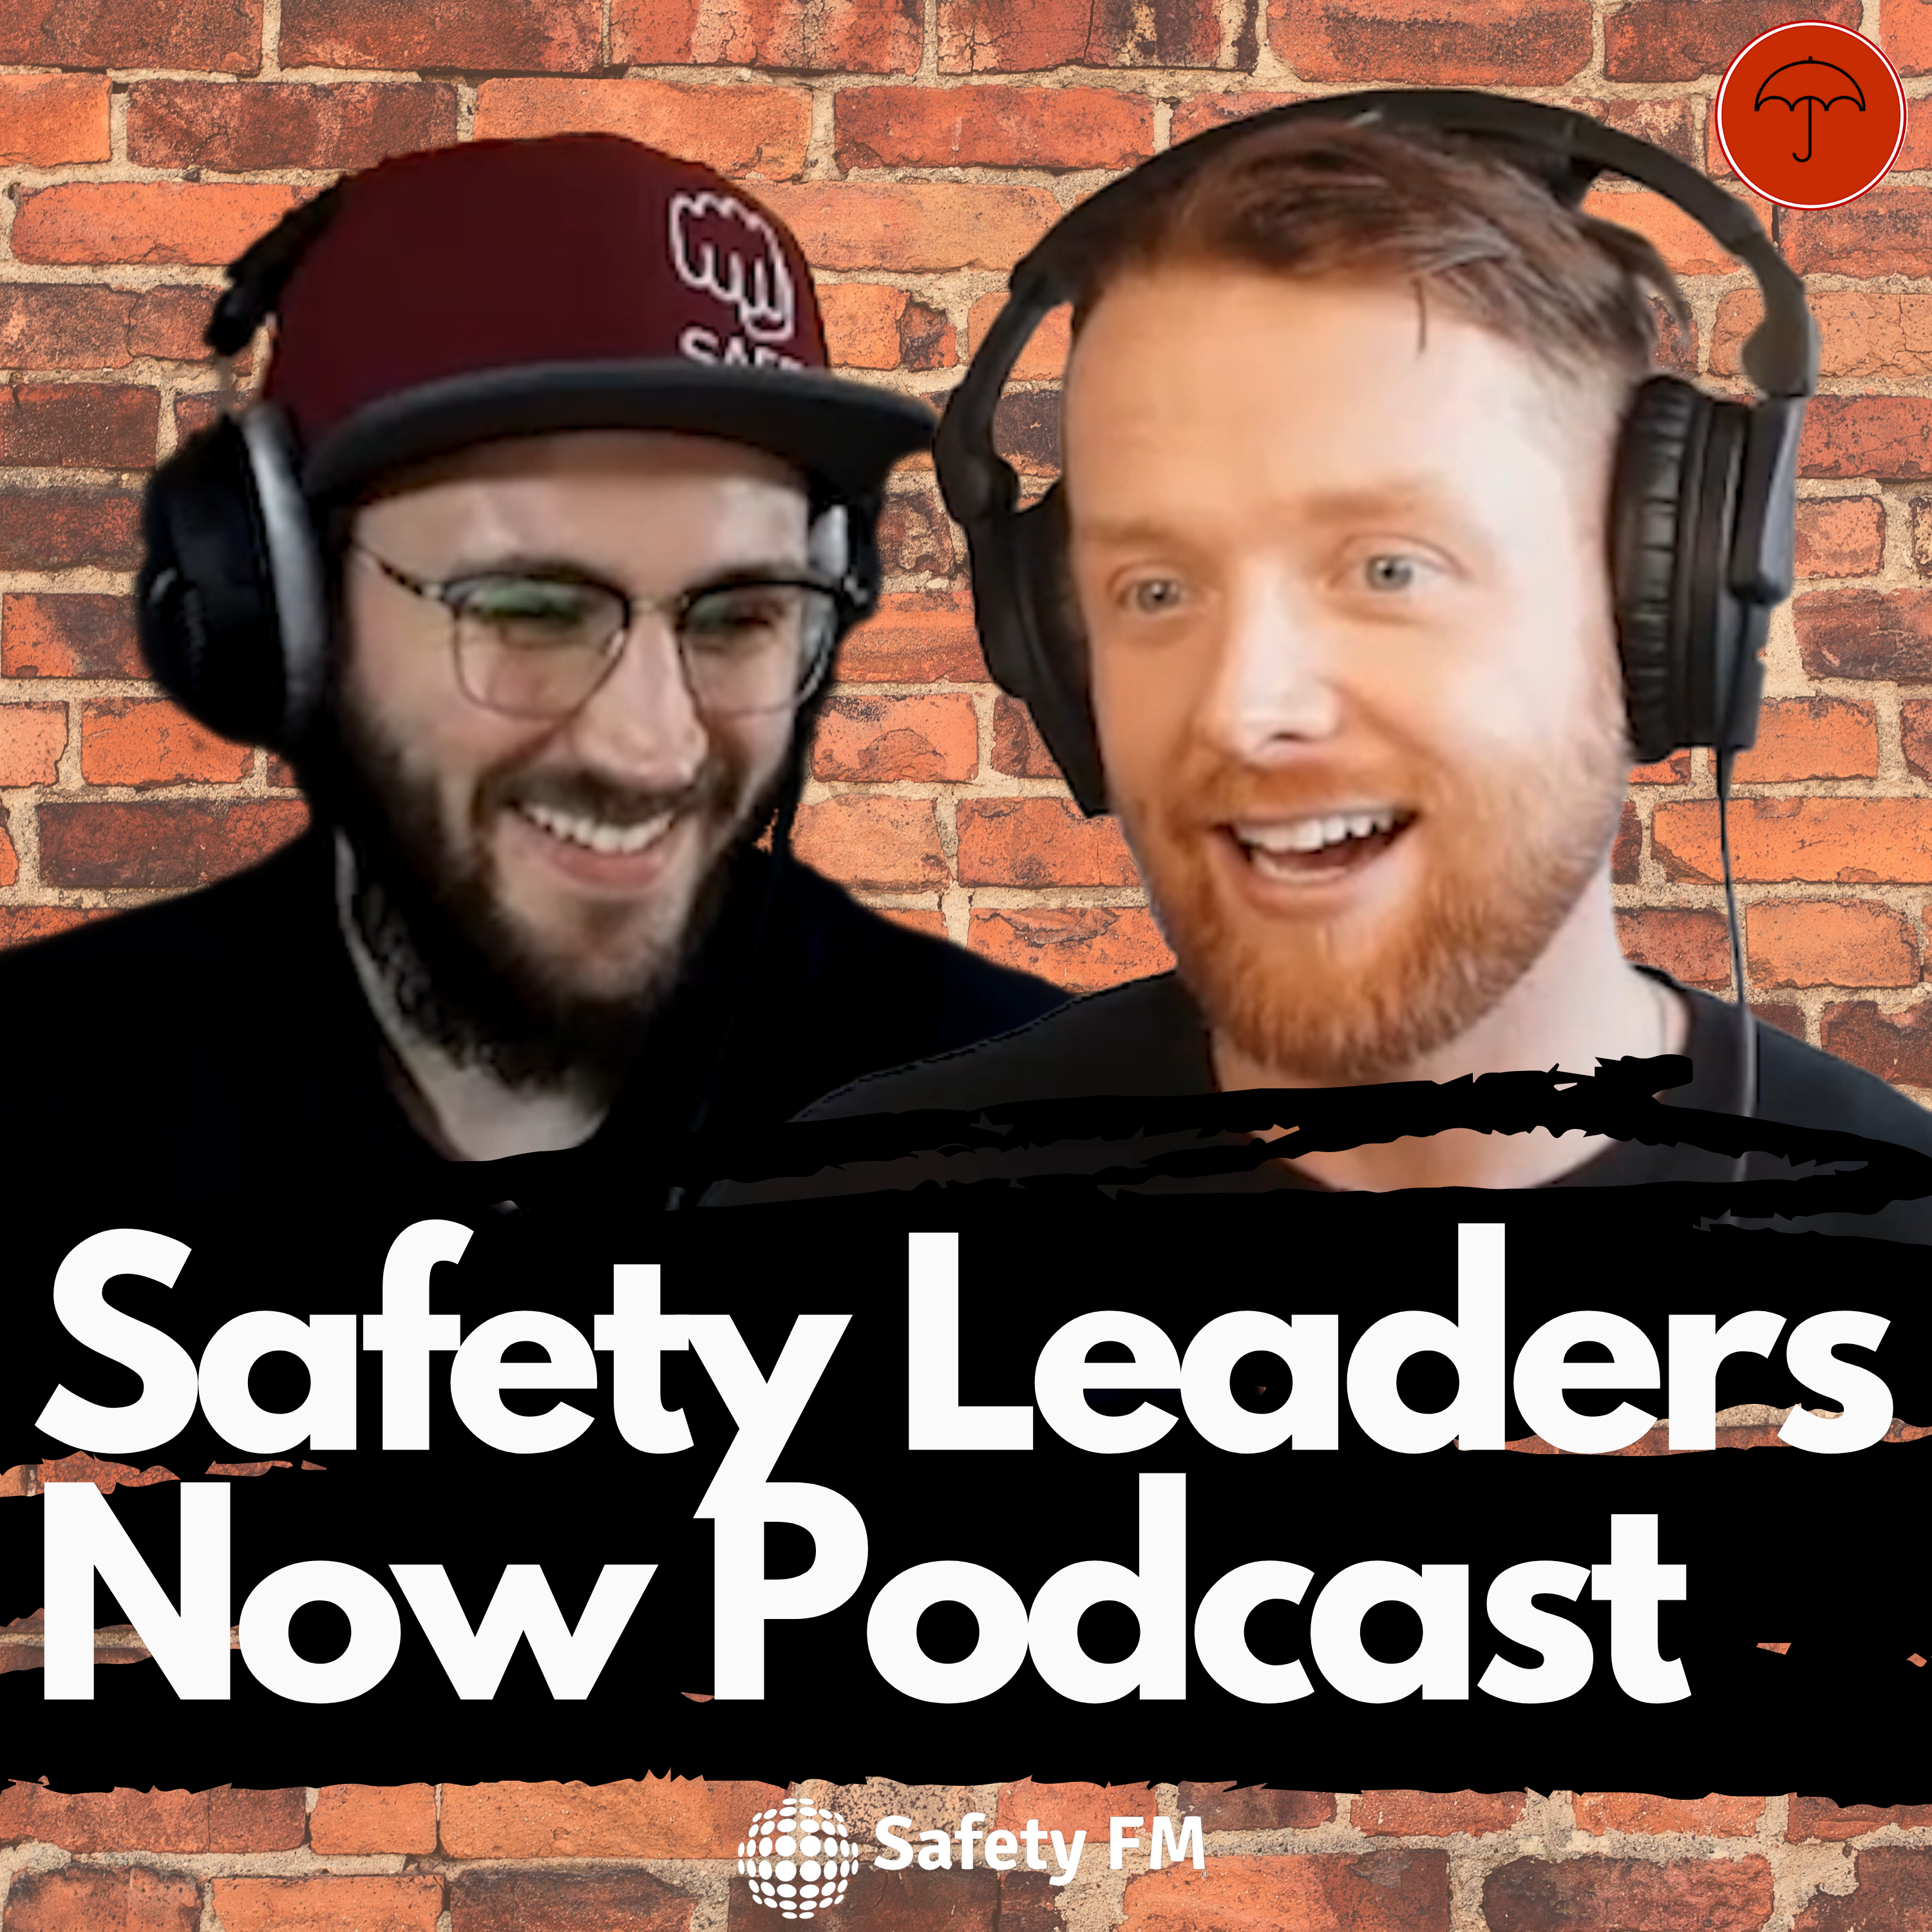 Safety Leaders Now Podcast - James MacP with host, Joe Meadows